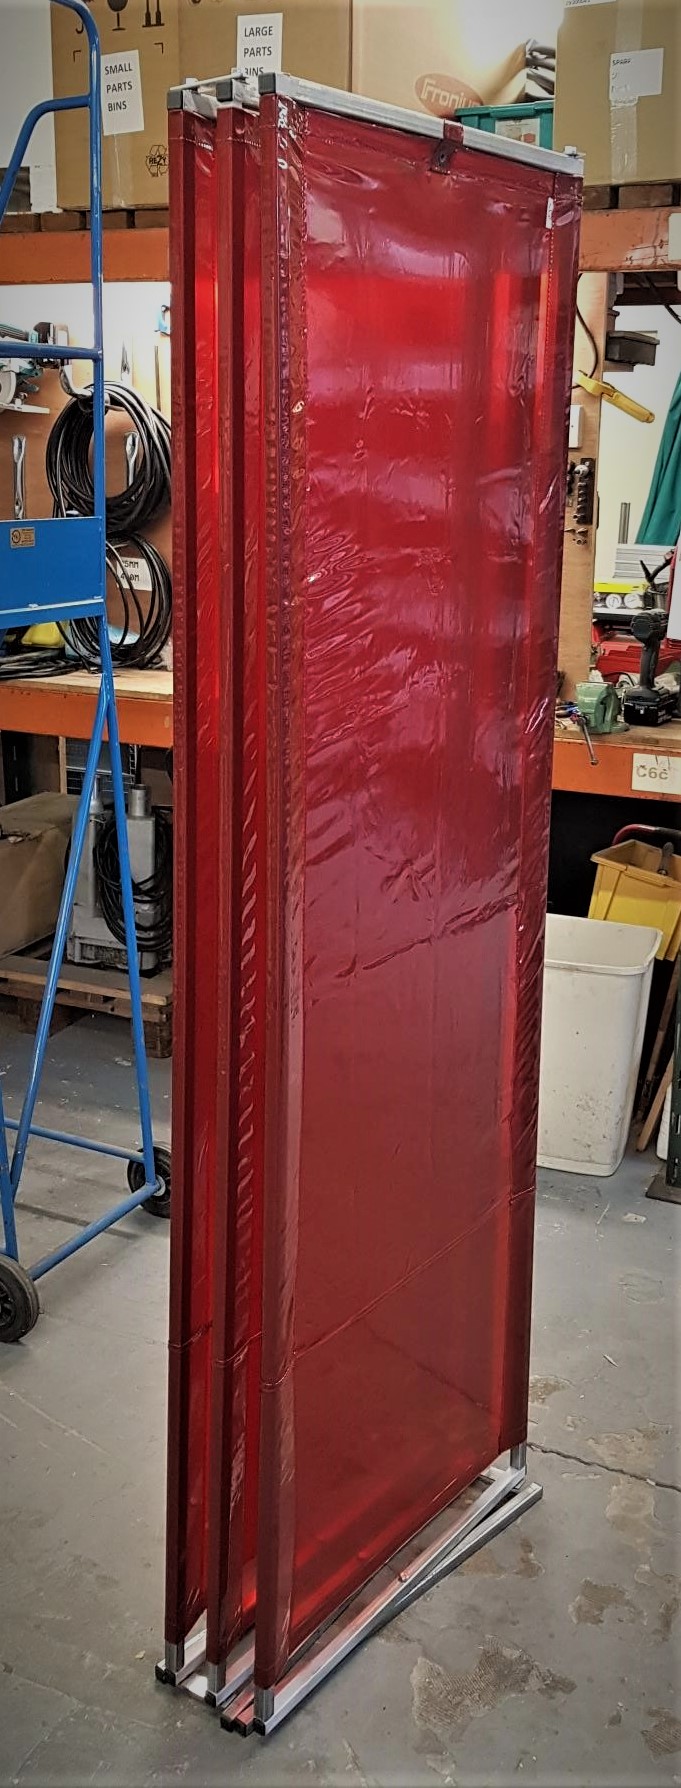 folded up red welding curtain